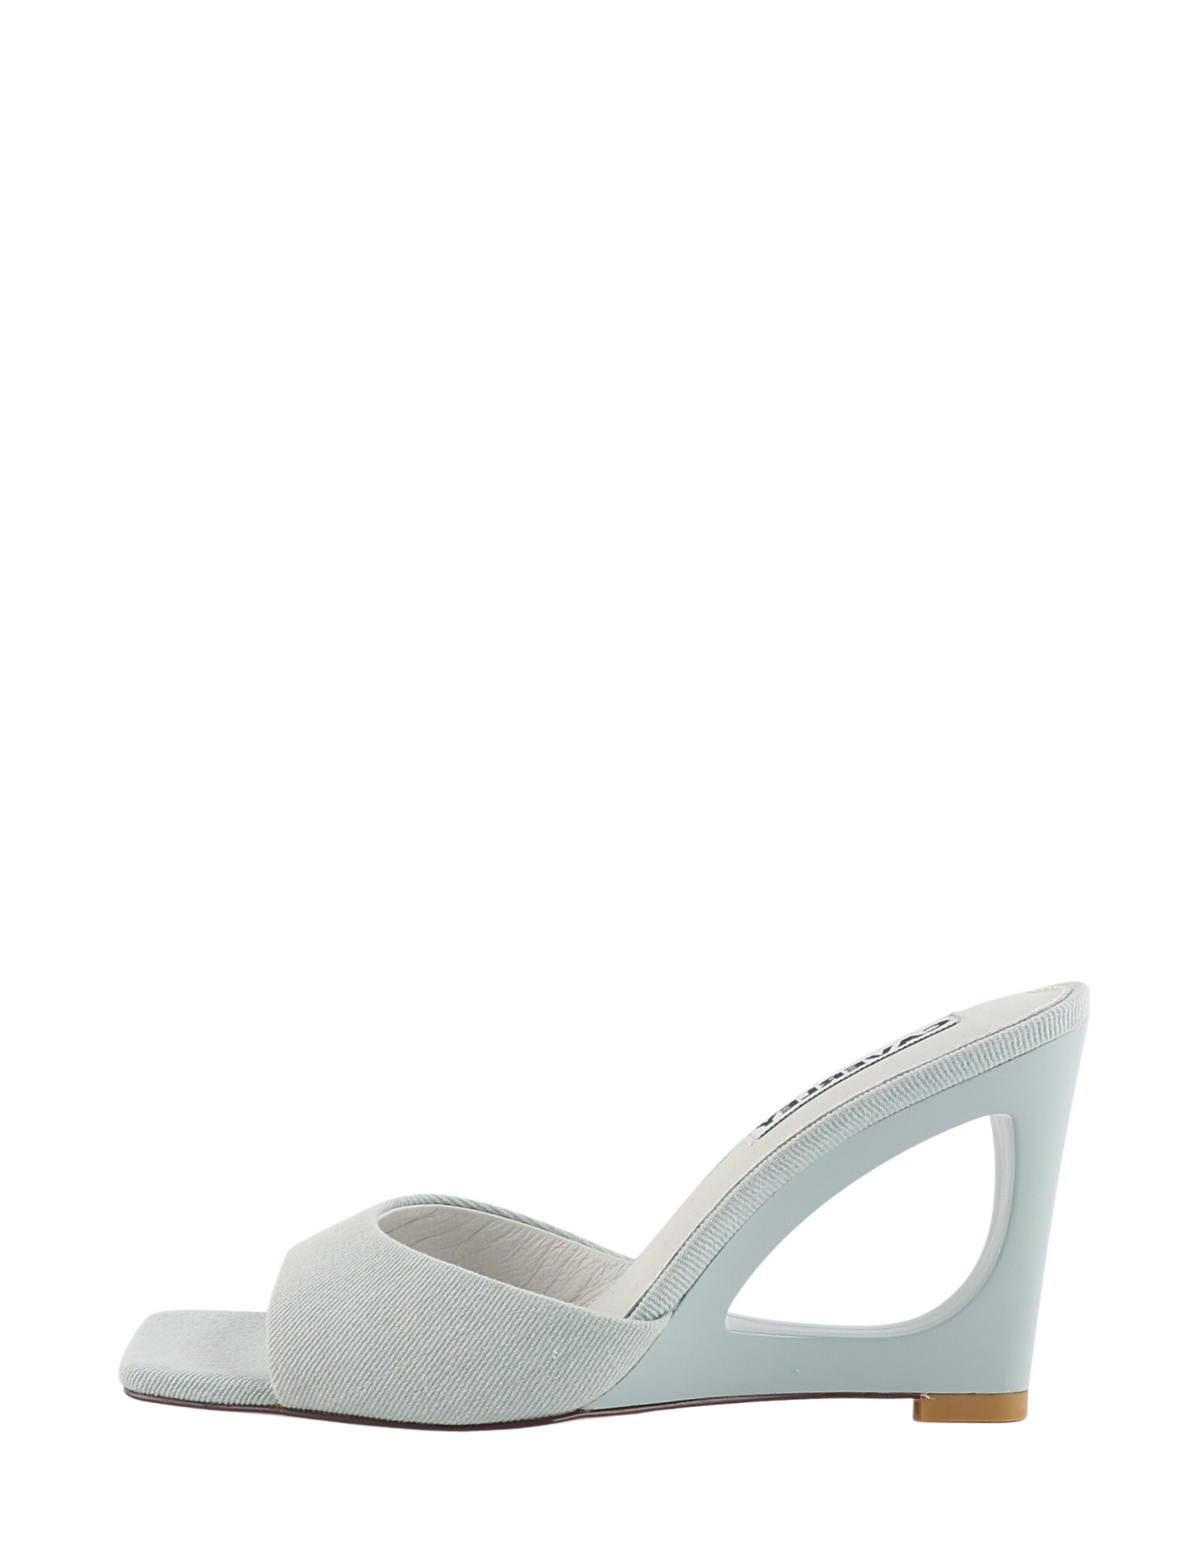 Parallel Culture Shoes and Fashion Online WEDGES CAVERLY OZI WEDGE